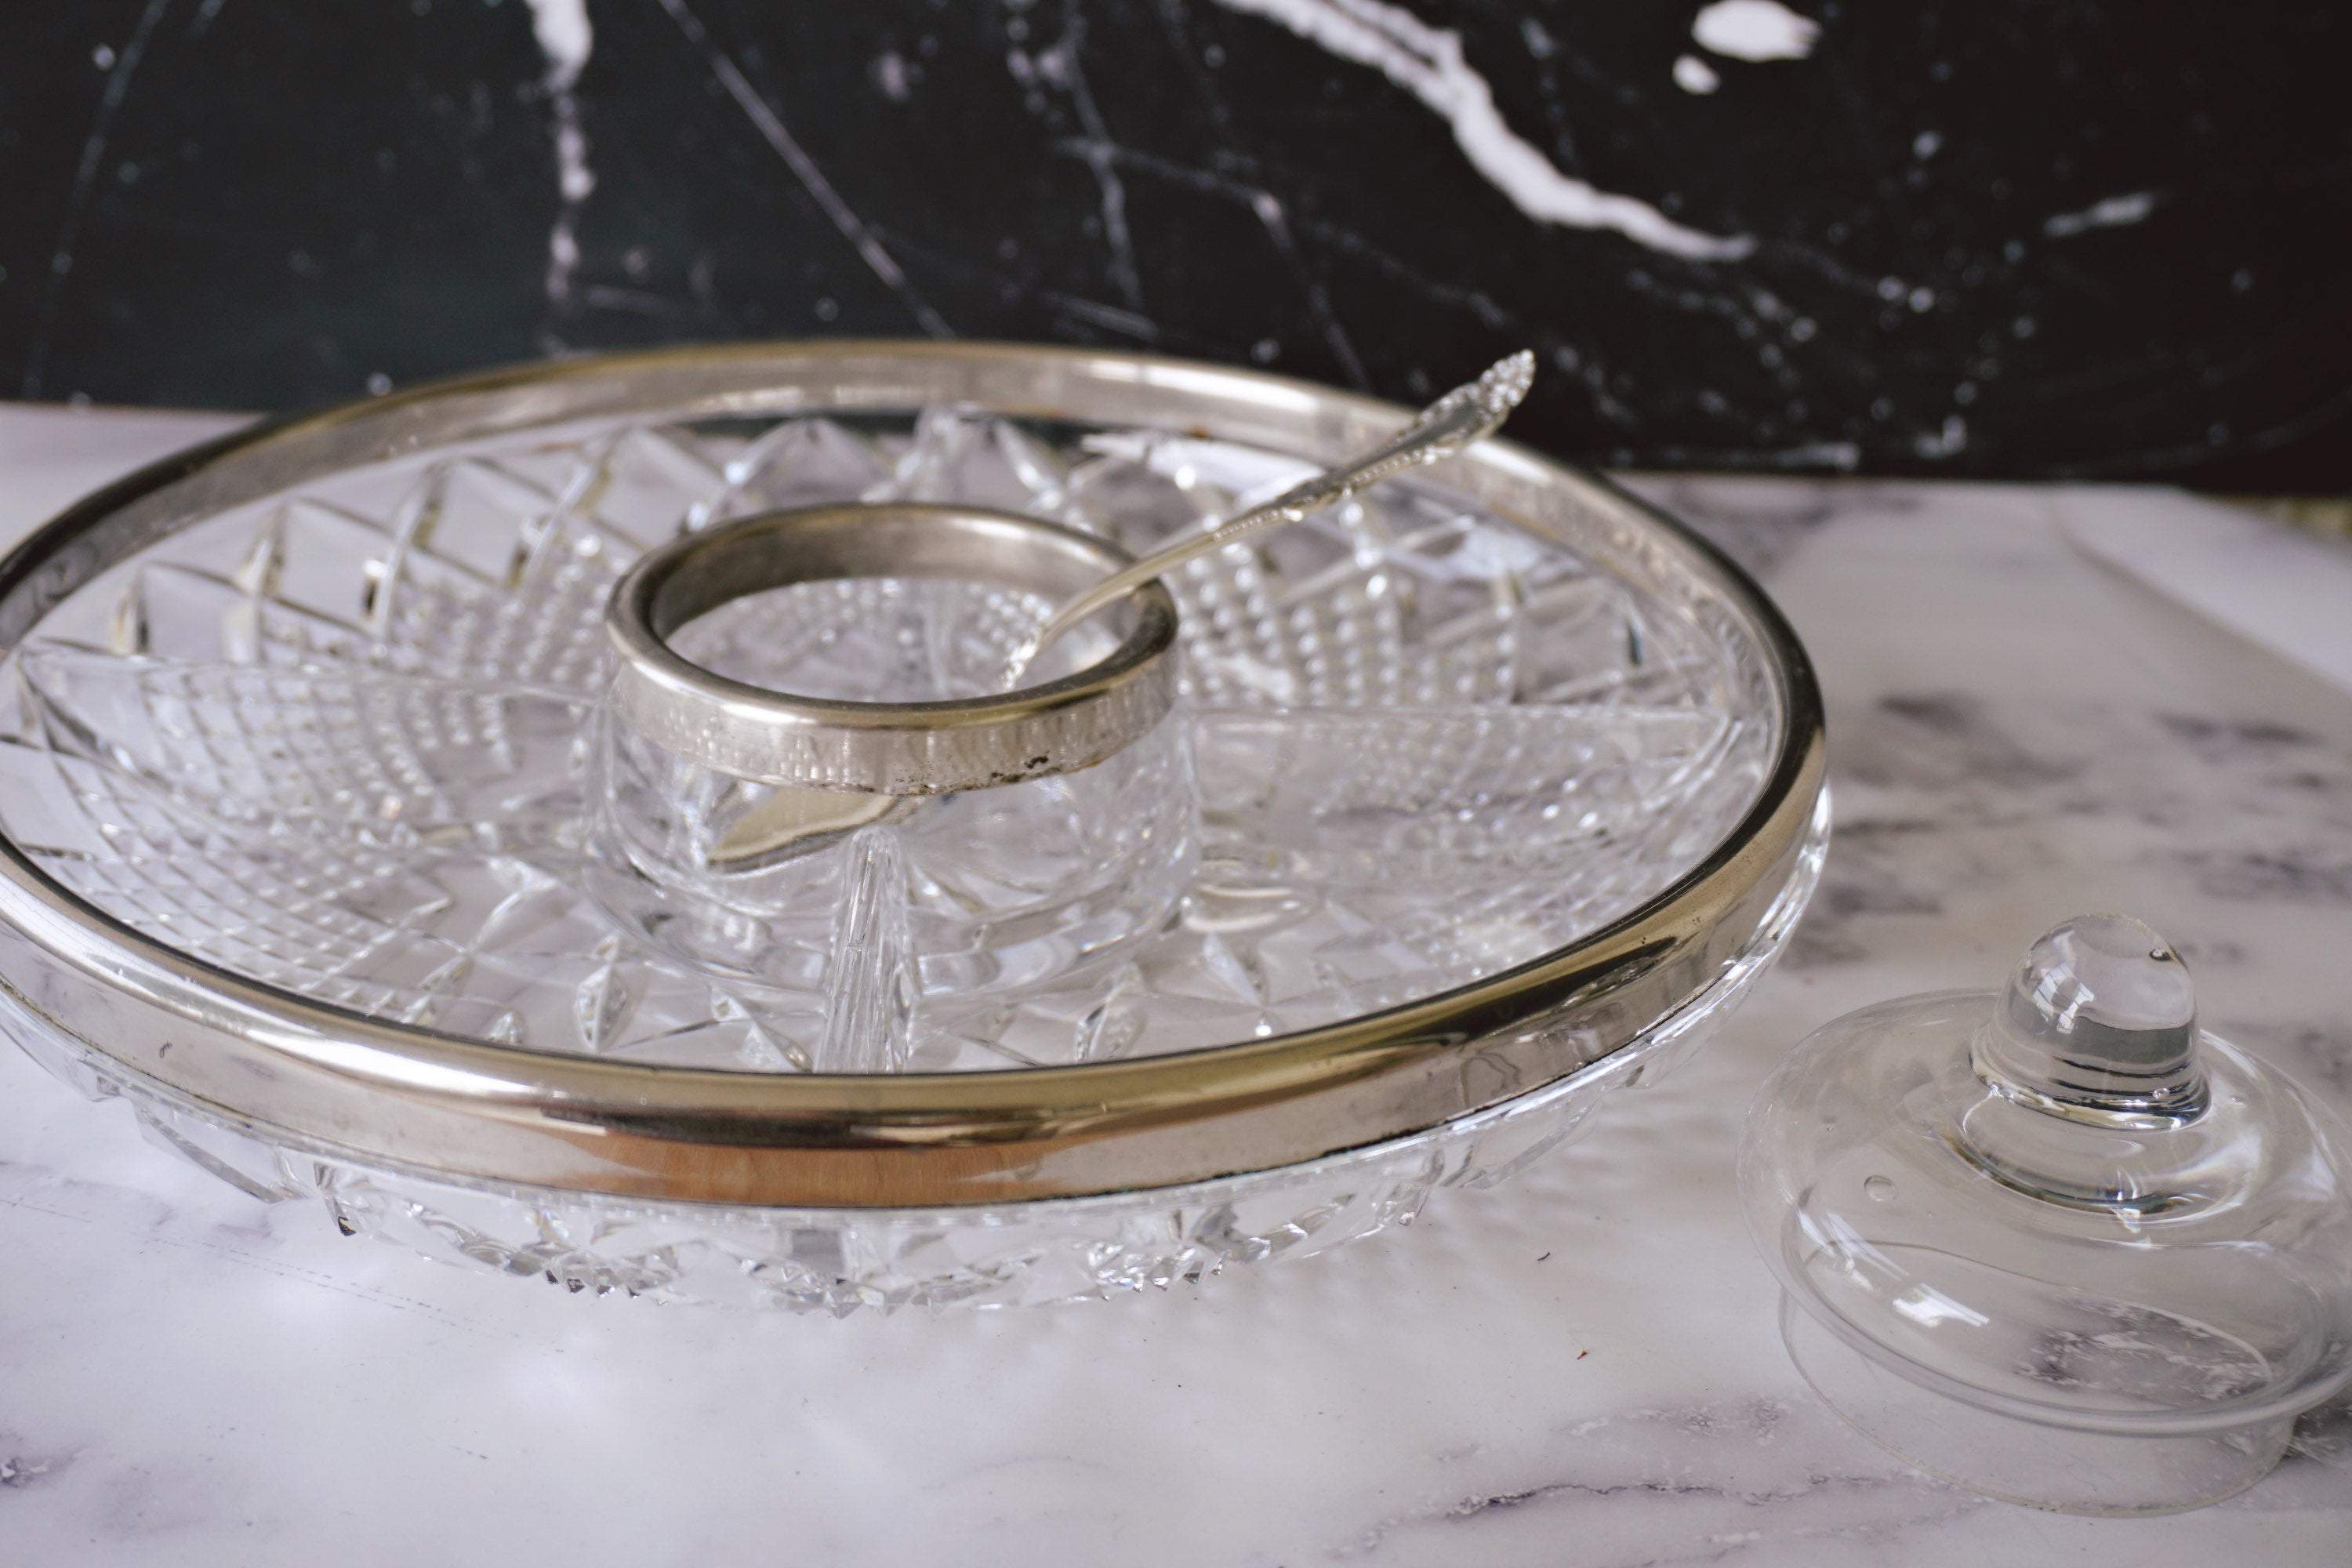 Vintage Heavy Cut Lead Crystal Divided Relish Tray with Silver-Plated Rim | Holiday Entertaining 5-Part Divided Snack Bowl - Urban Nomad NYC